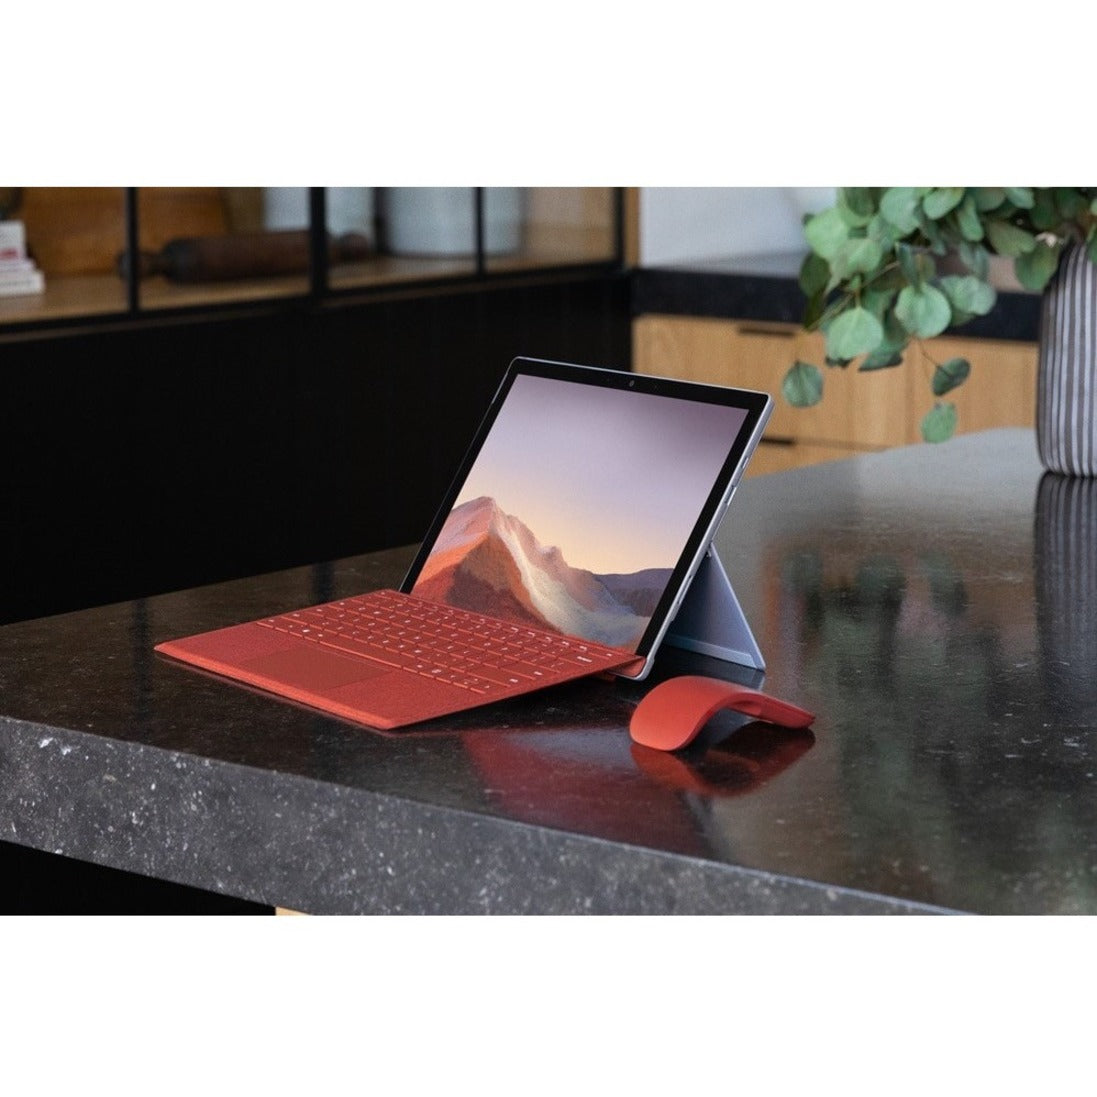 Microsoft KCT-00061 Surface Go Type Cover - English, Poppy Red Alcantara Keyboard/Cover Case